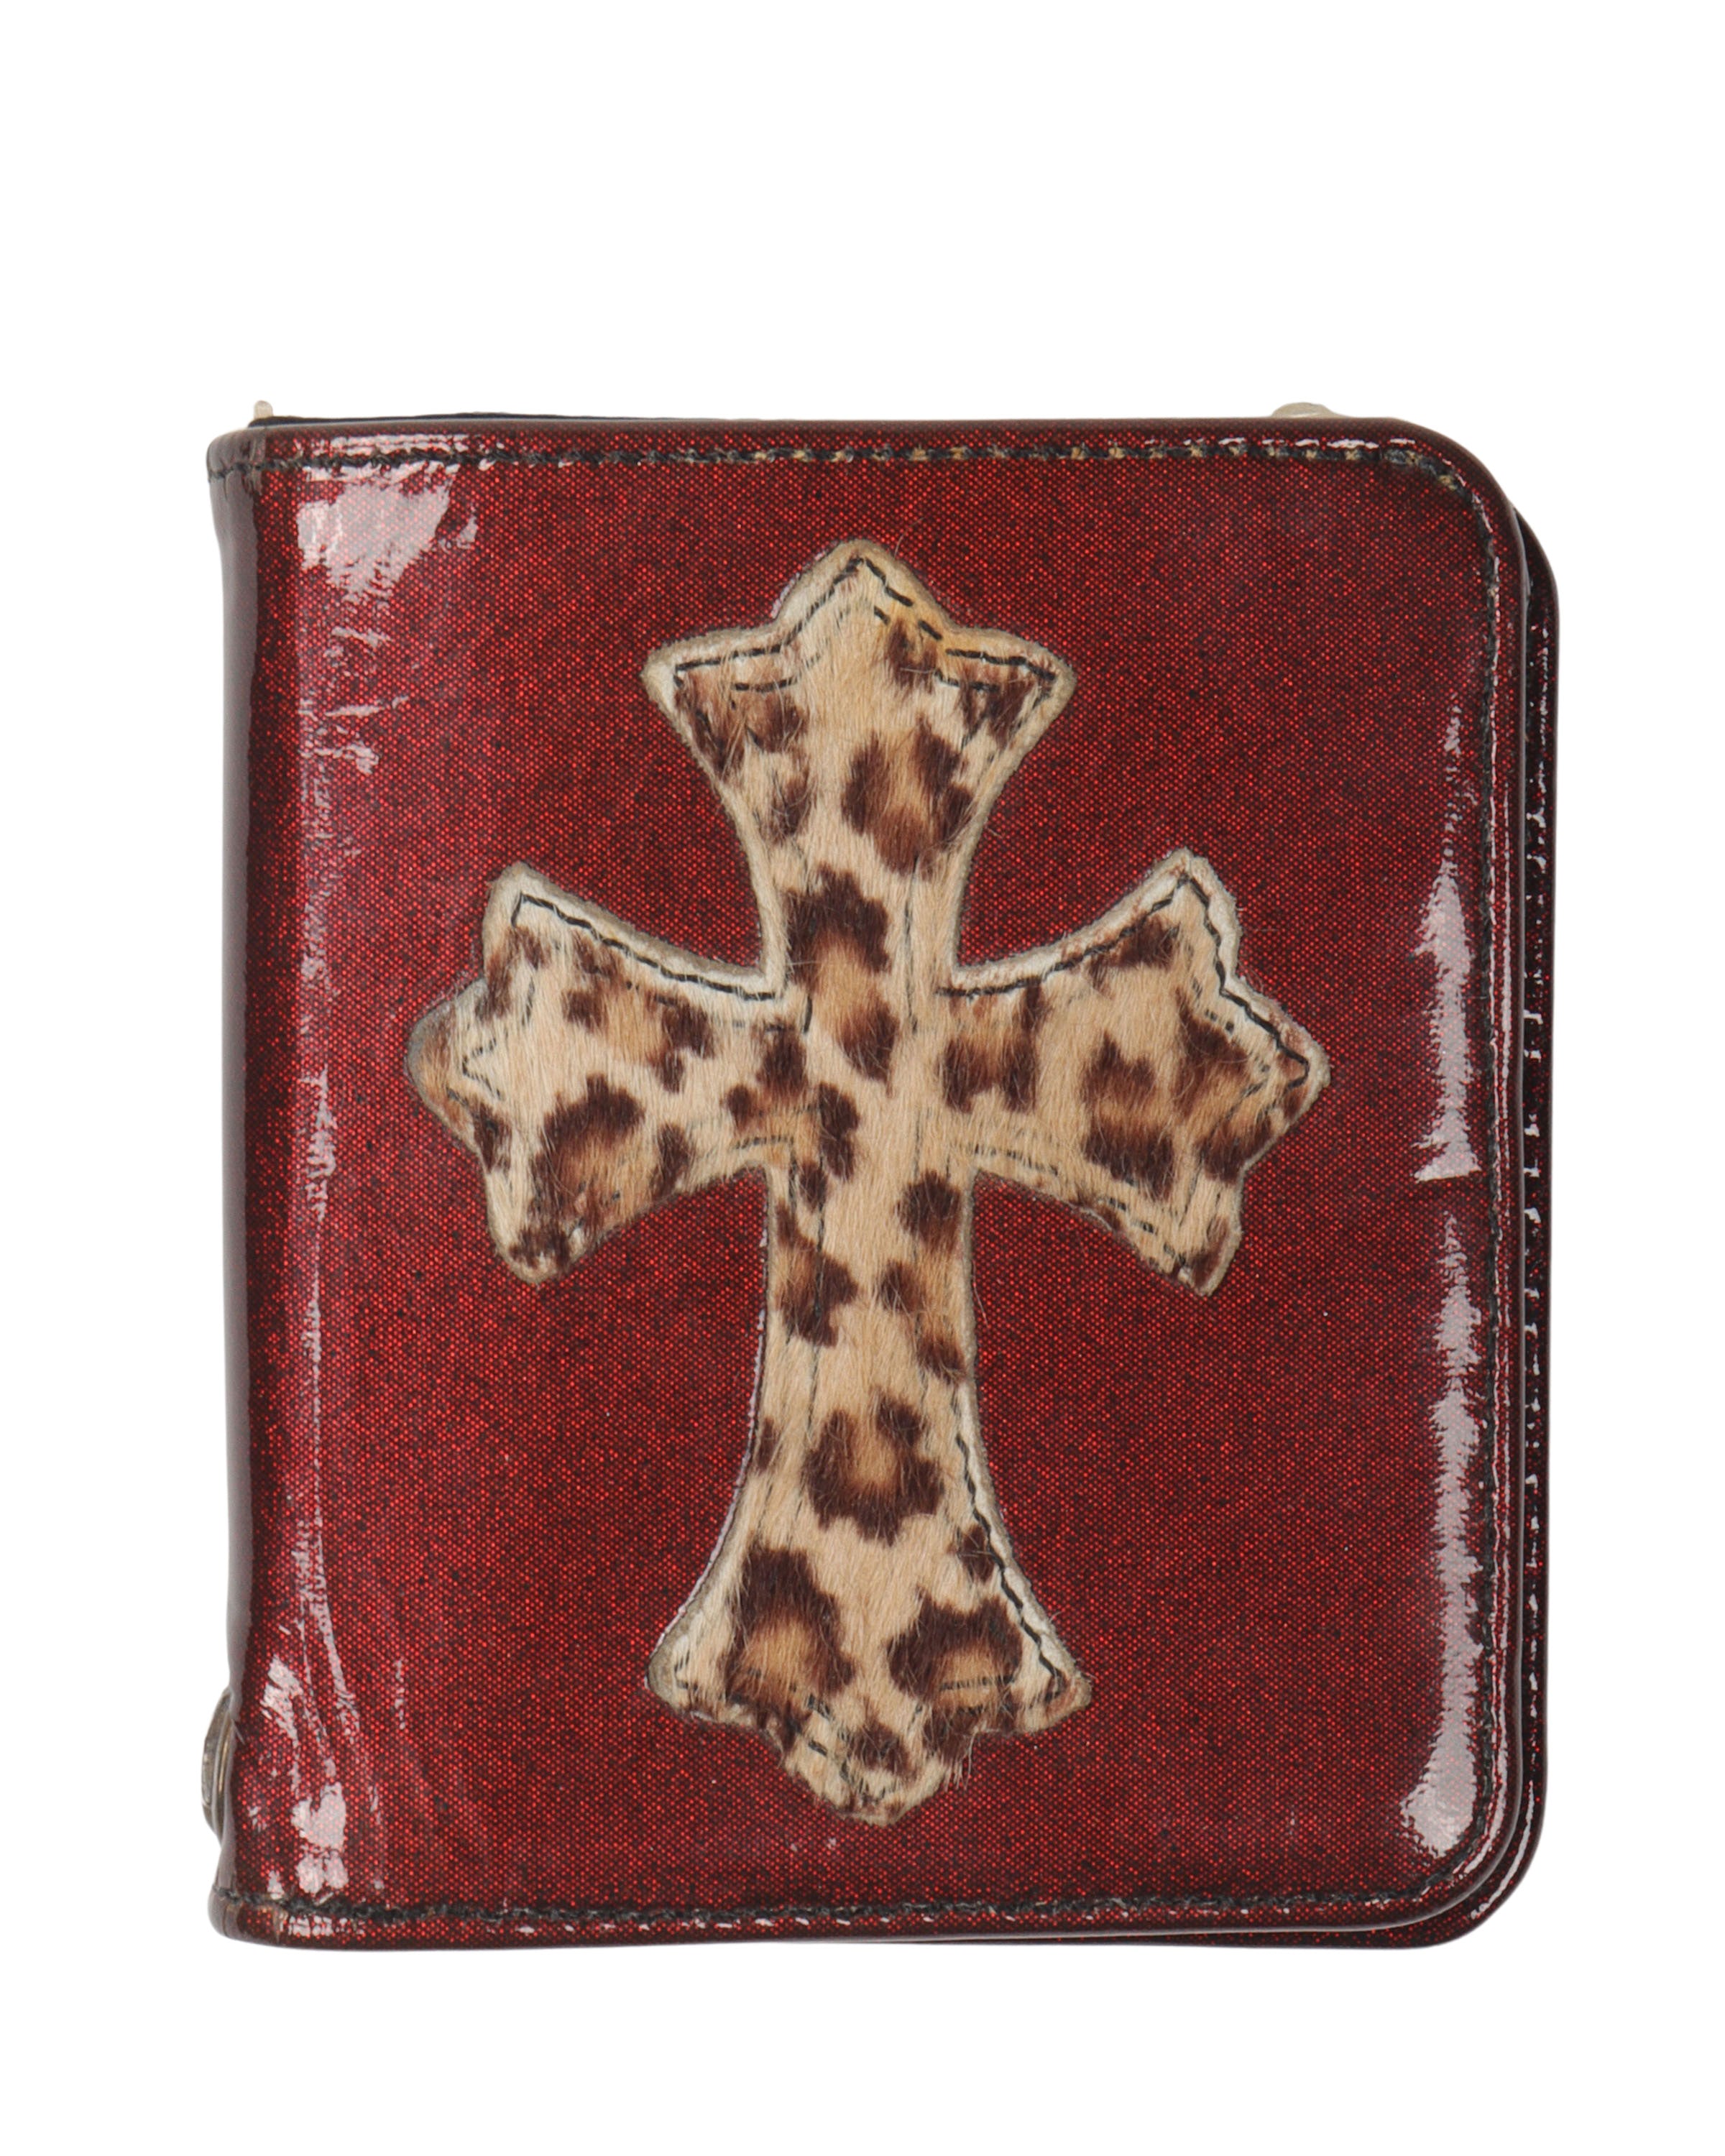 CHROME HEARTS LEATHER cross patch Red CH Set (8) Total $96.00 - PicClick